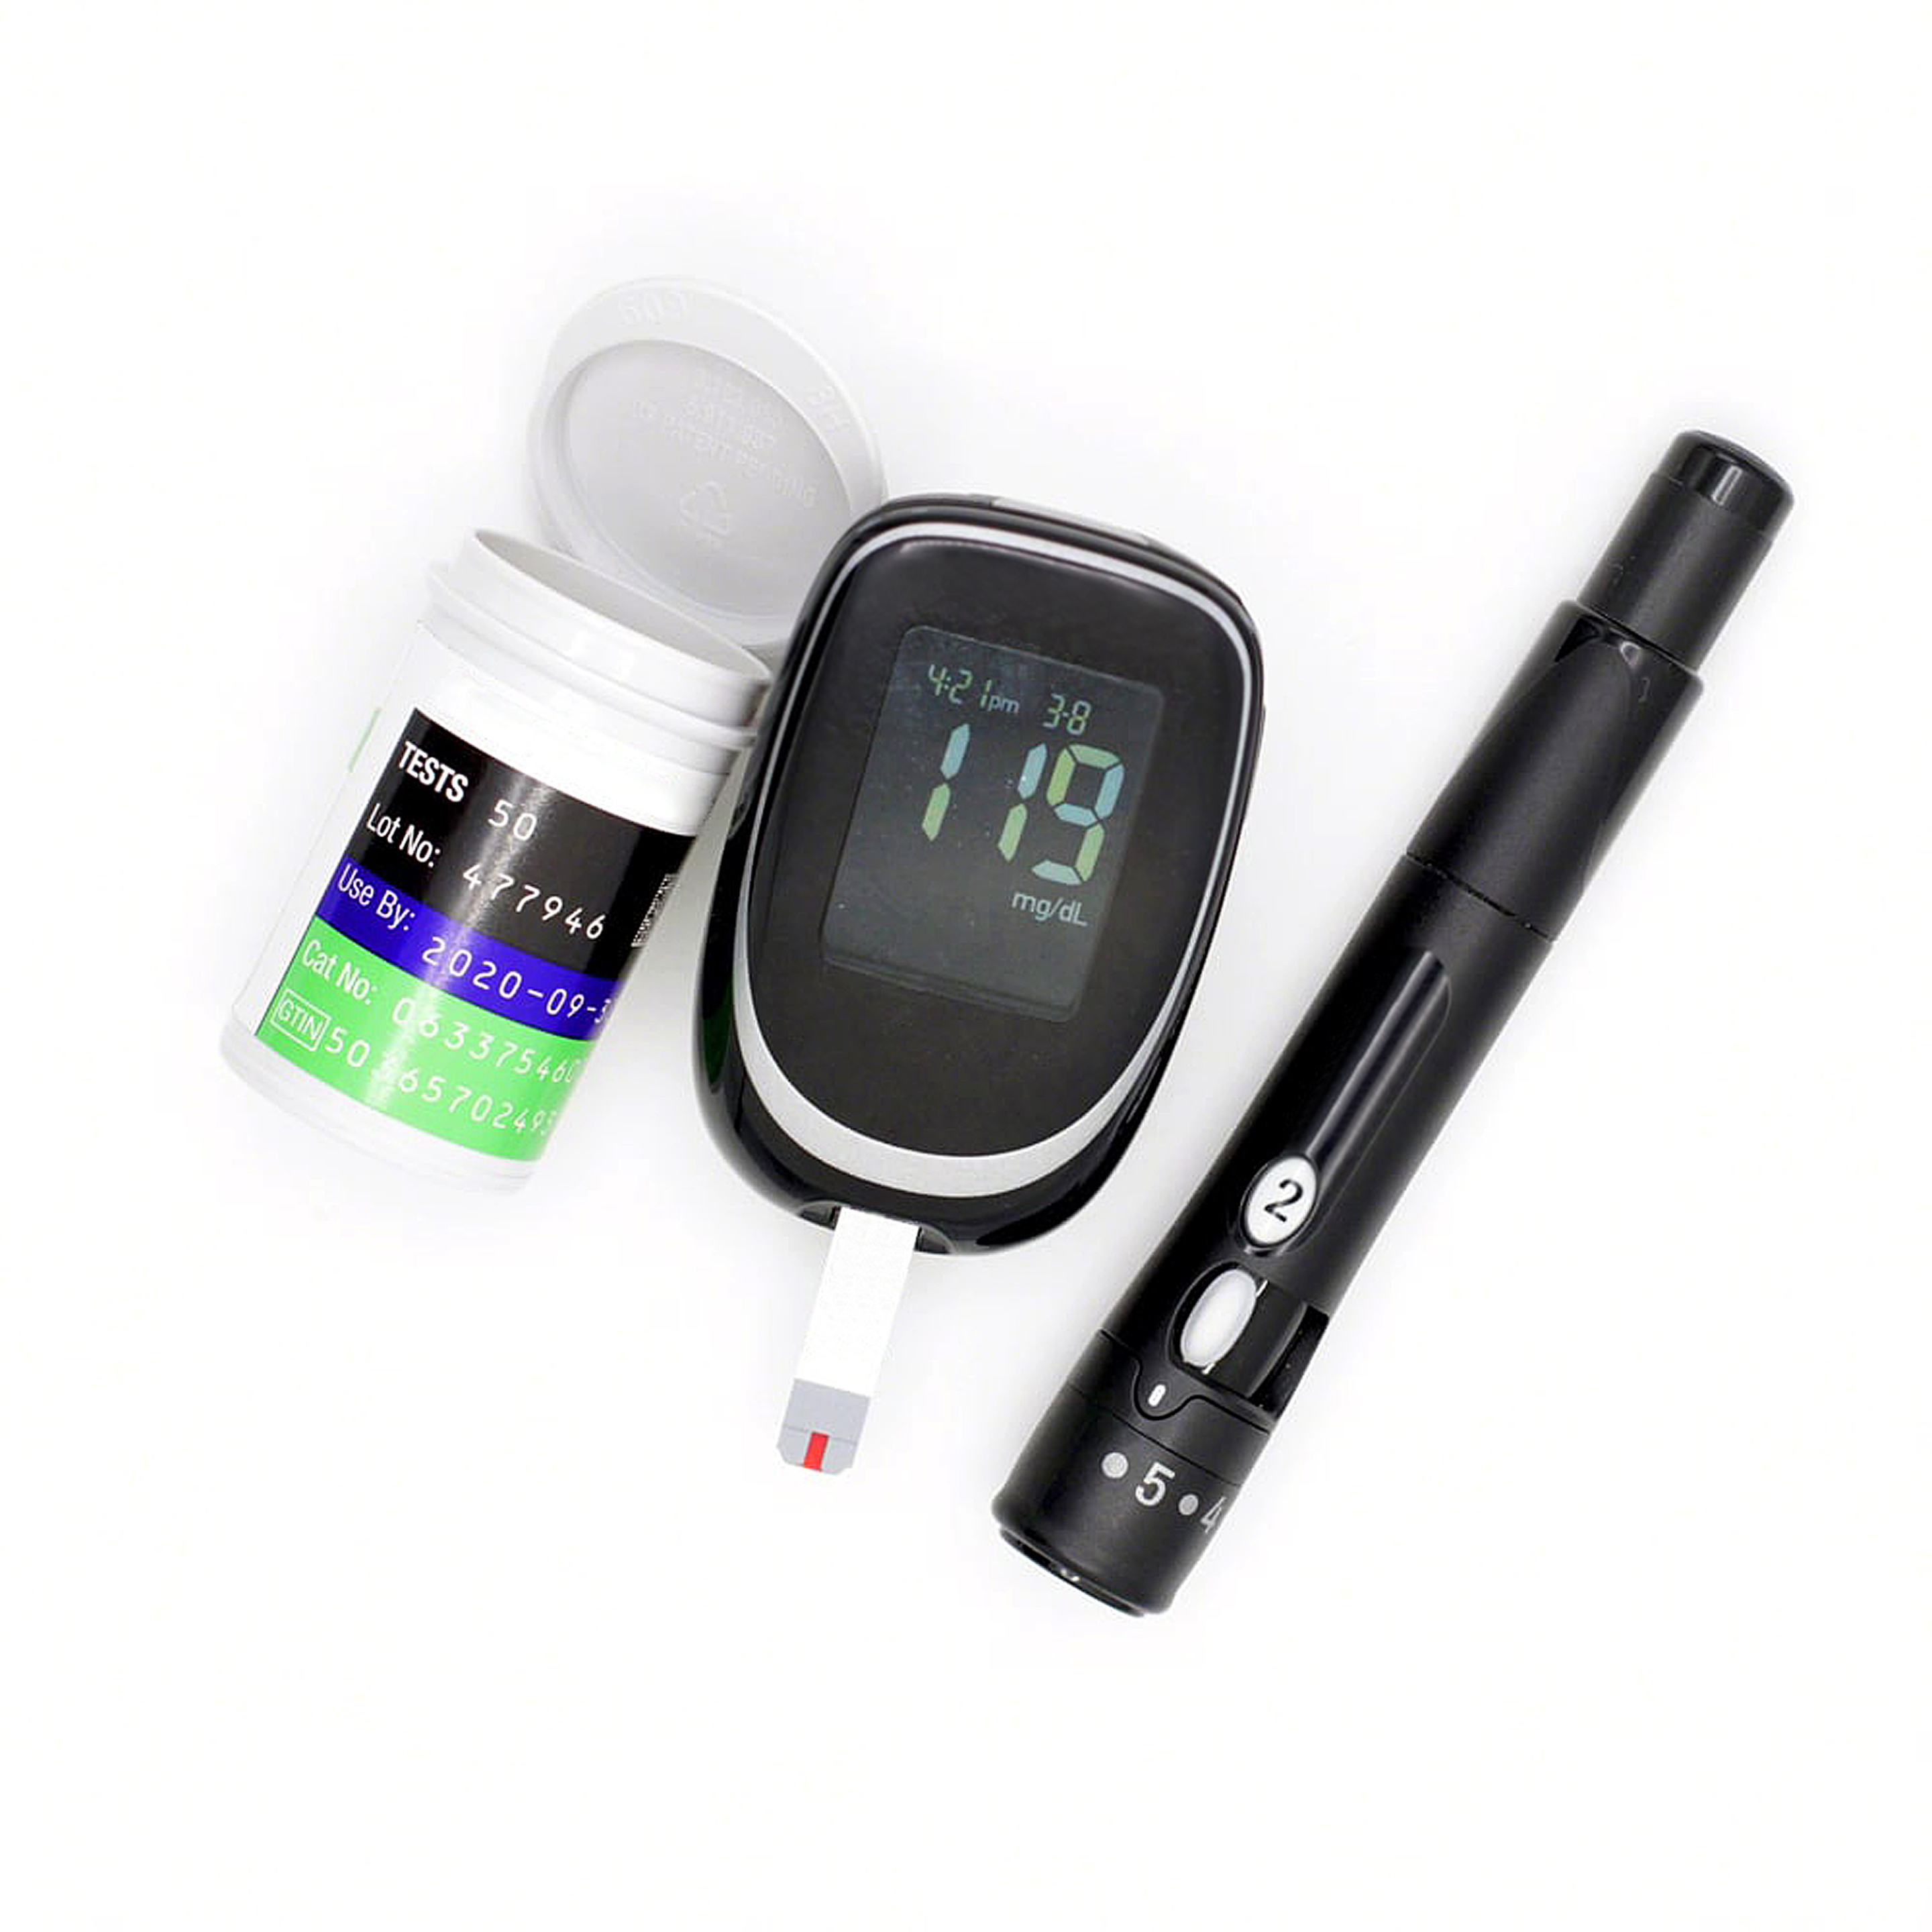 Diabetes test strips and blood glucose tester